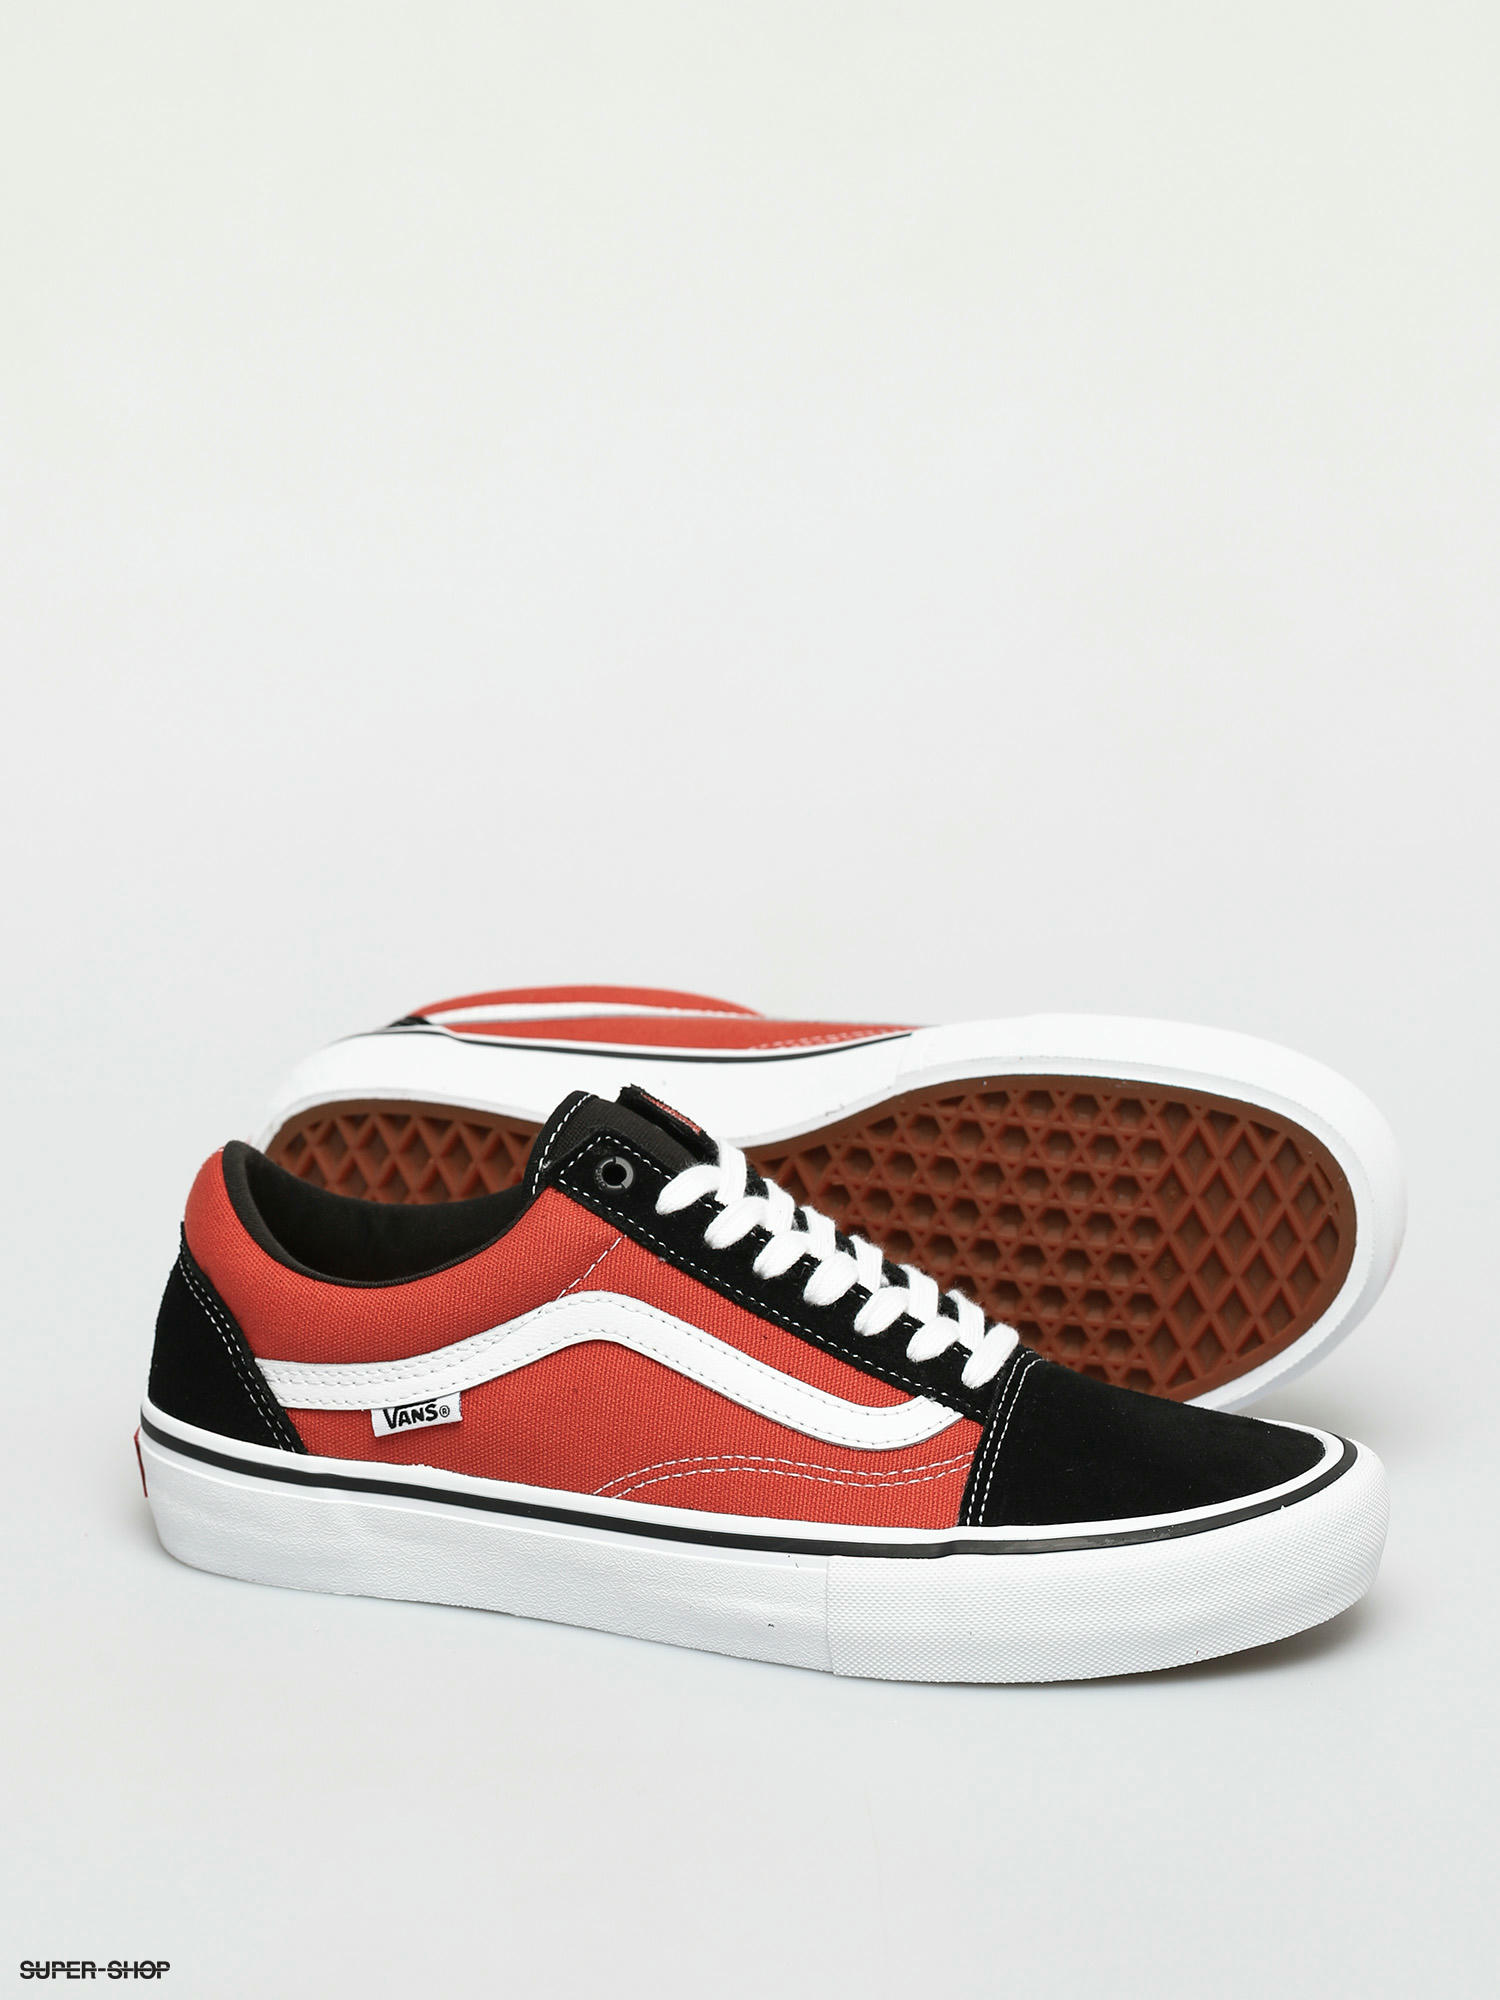 vans shoes red and black laces